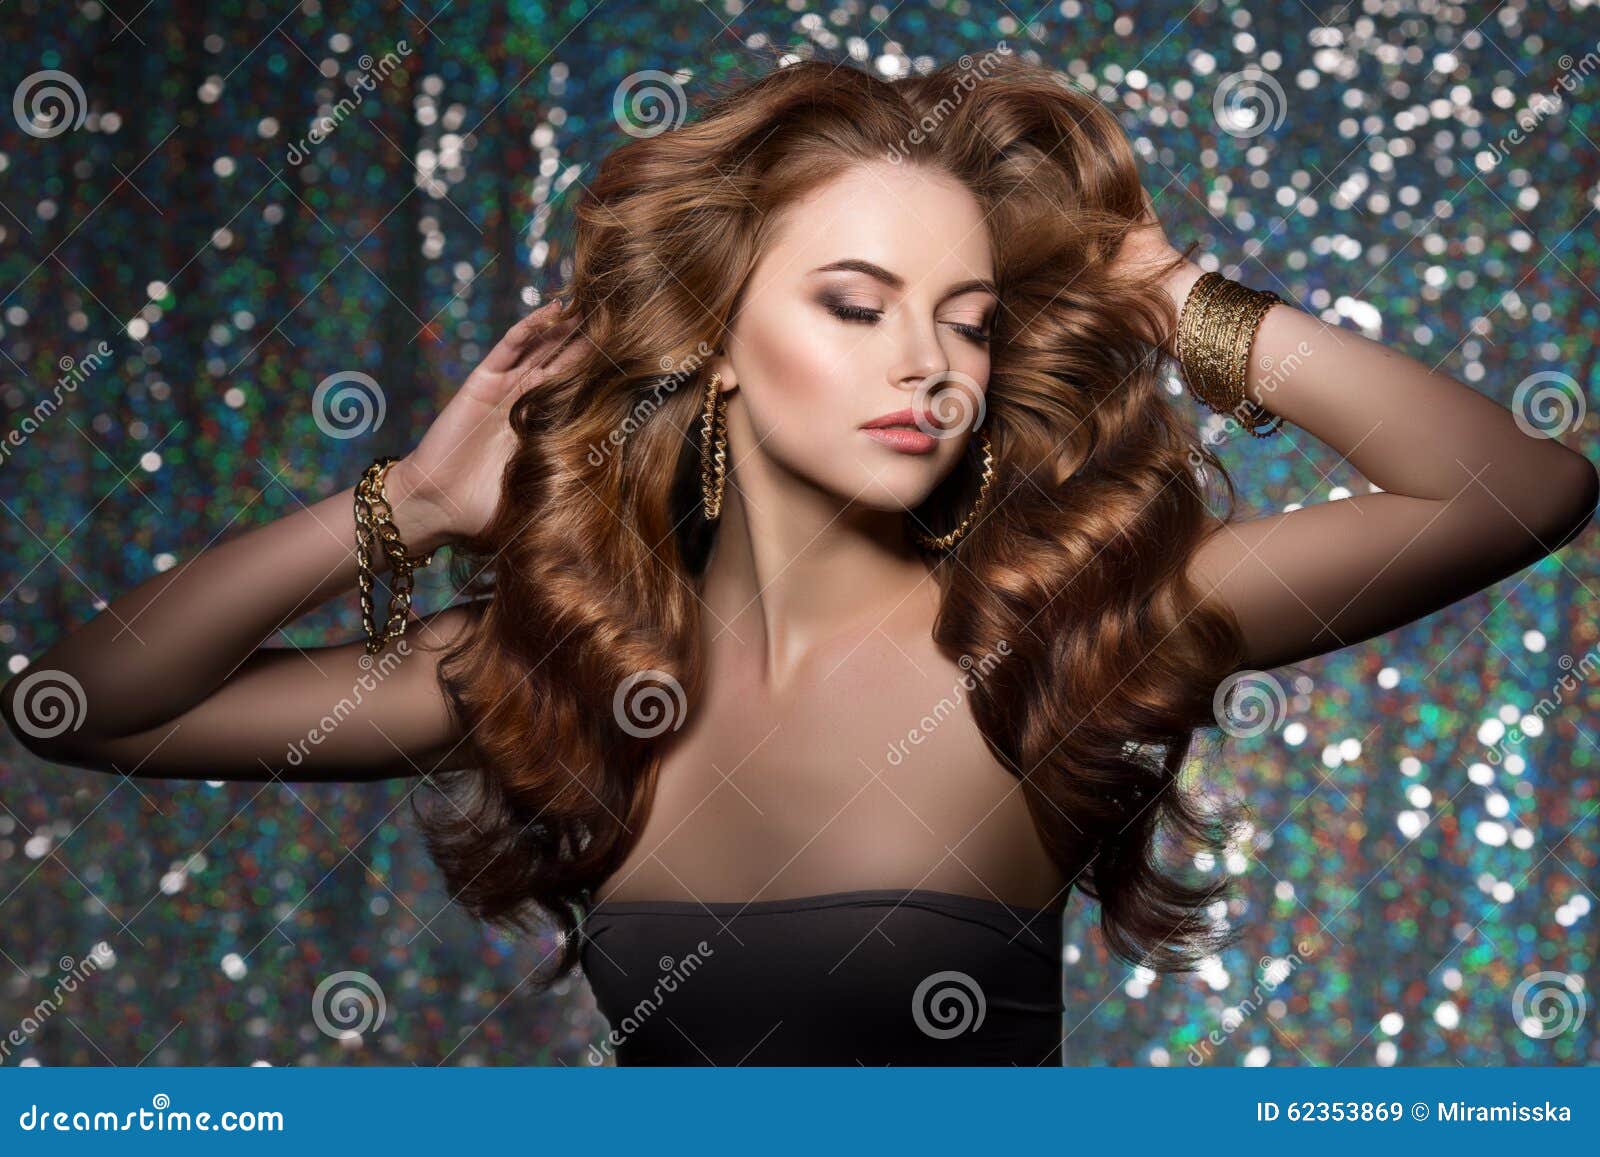 Woman Club Lights Party Background. Dancing Girl Long Hair Stock Image -  Image of haircare, event: 62353869